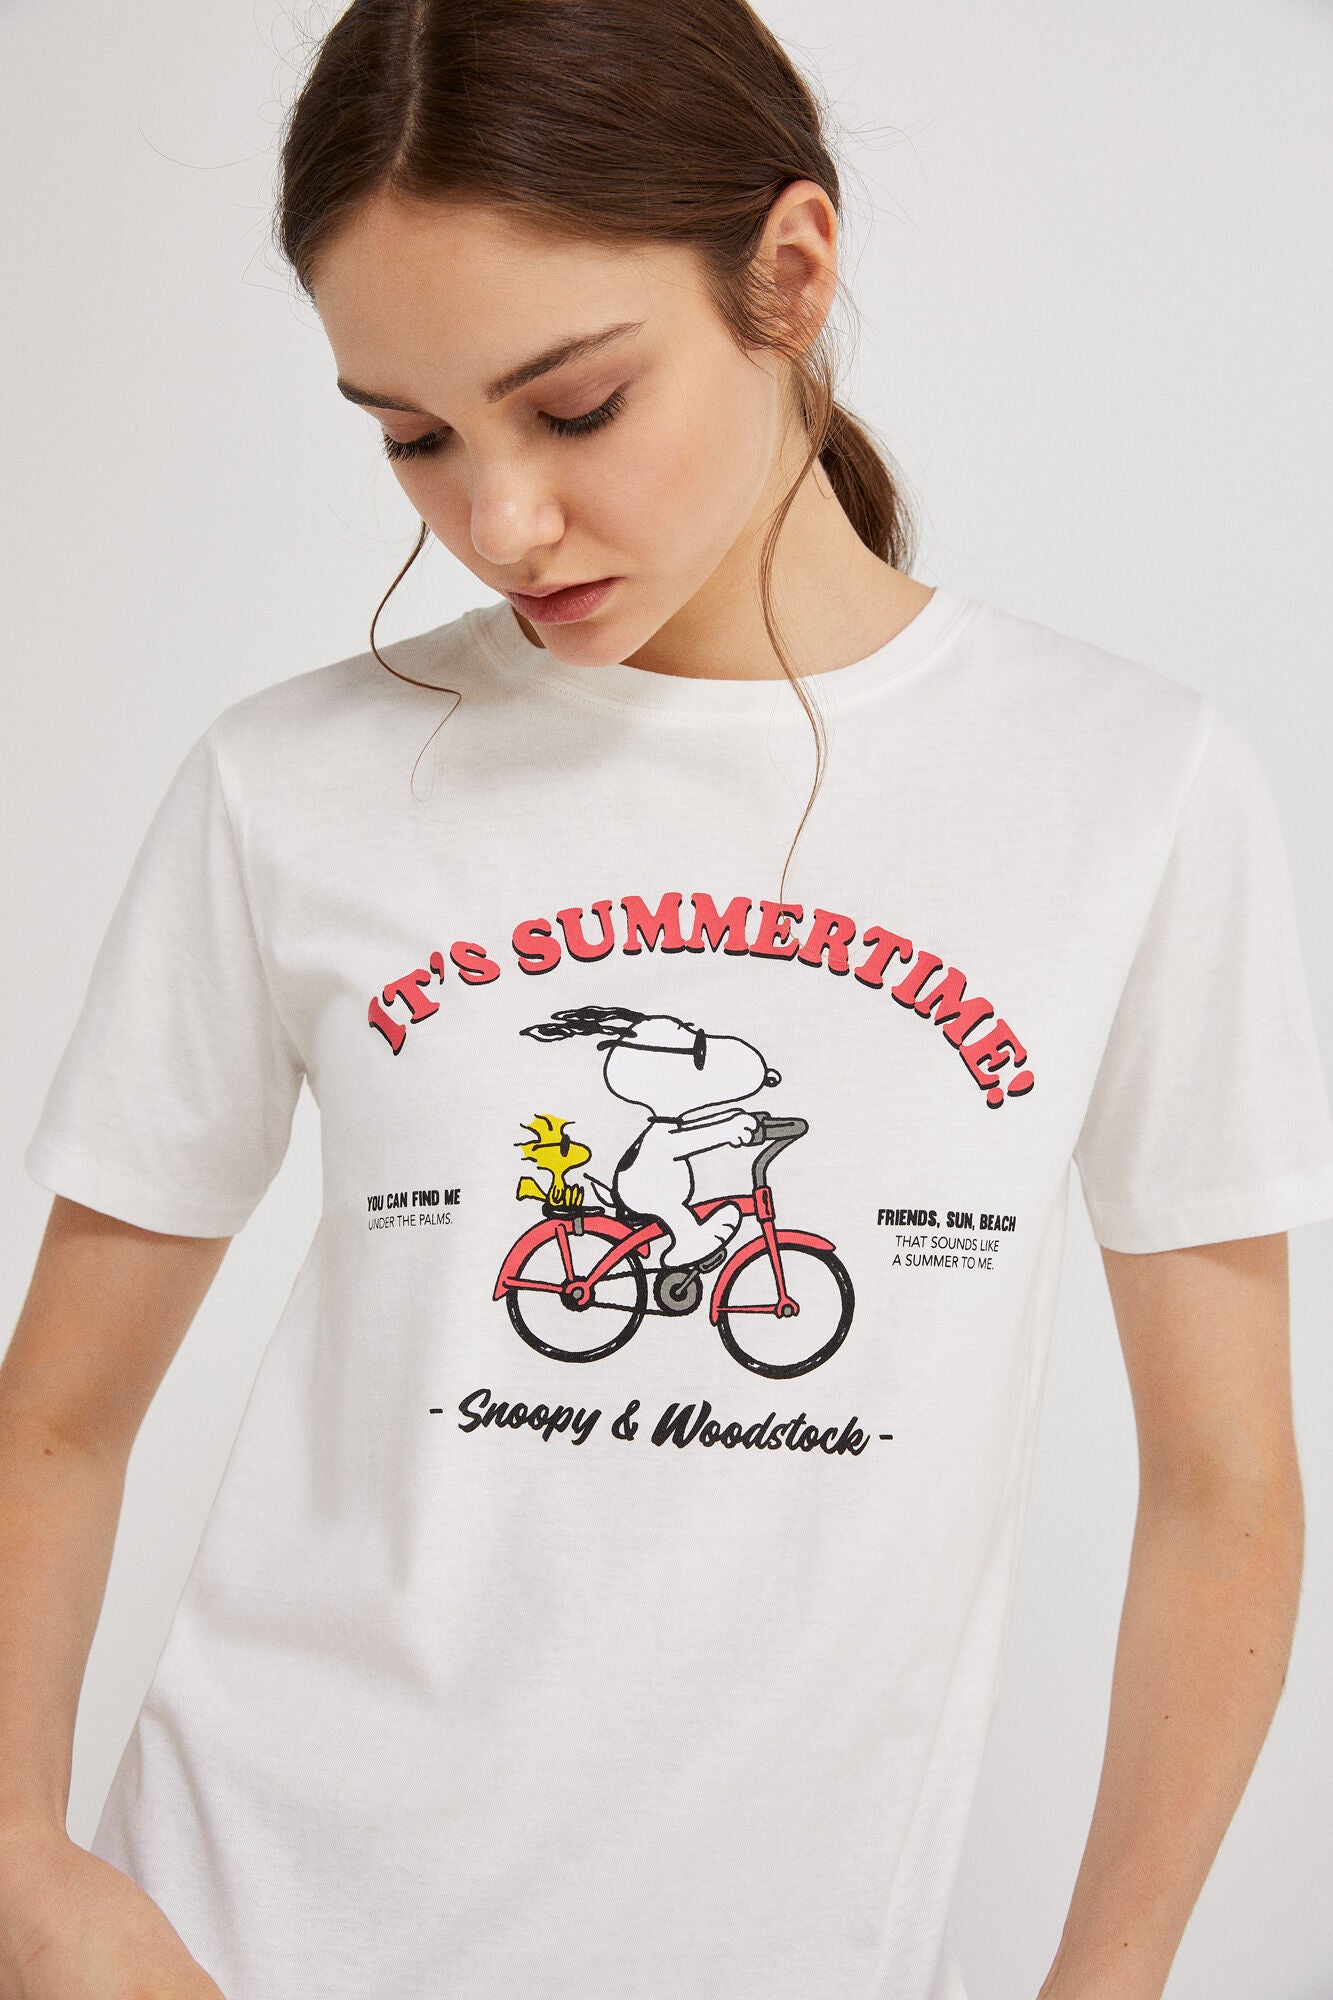 "It's summer time" Snoopy T-shirt